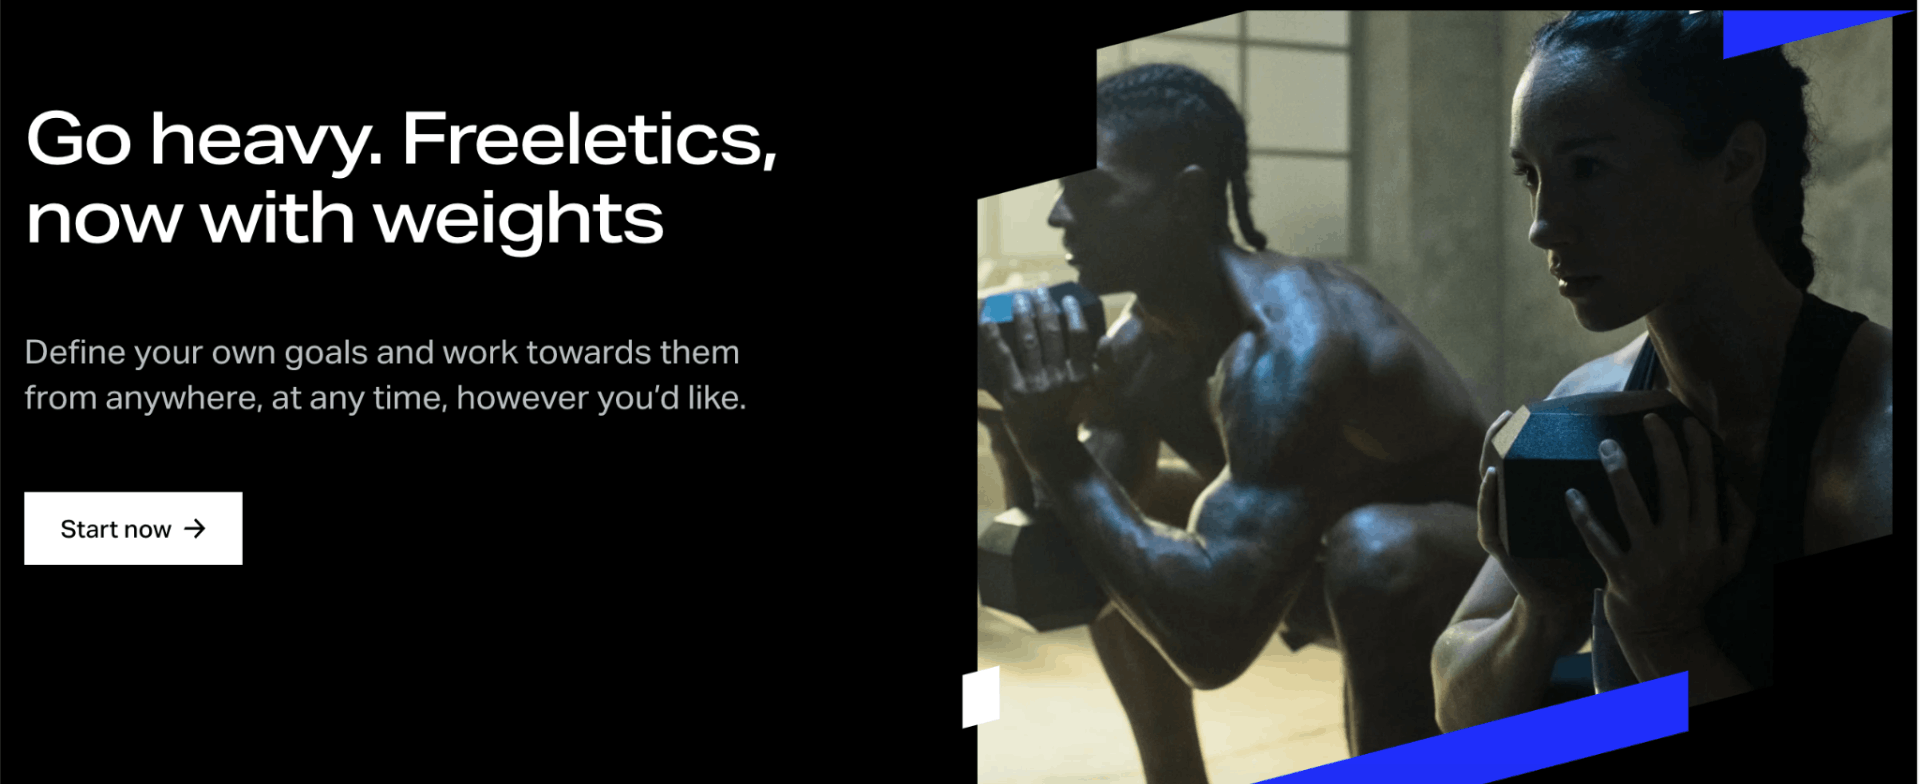 Freeletics Training Coach - How To Download And Use The App